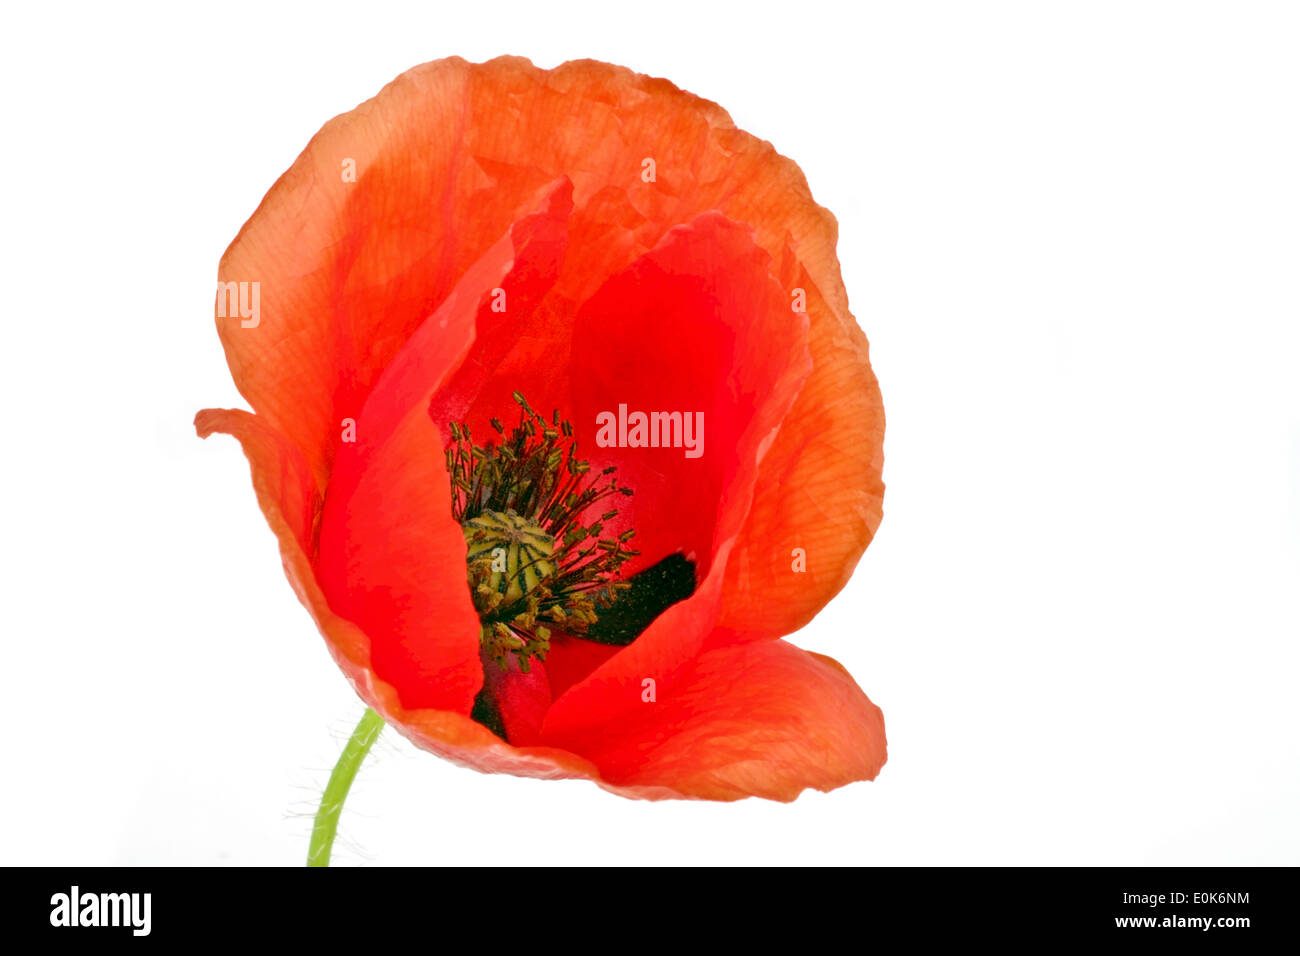 Red poppy flower close up on a white background Stock Photo